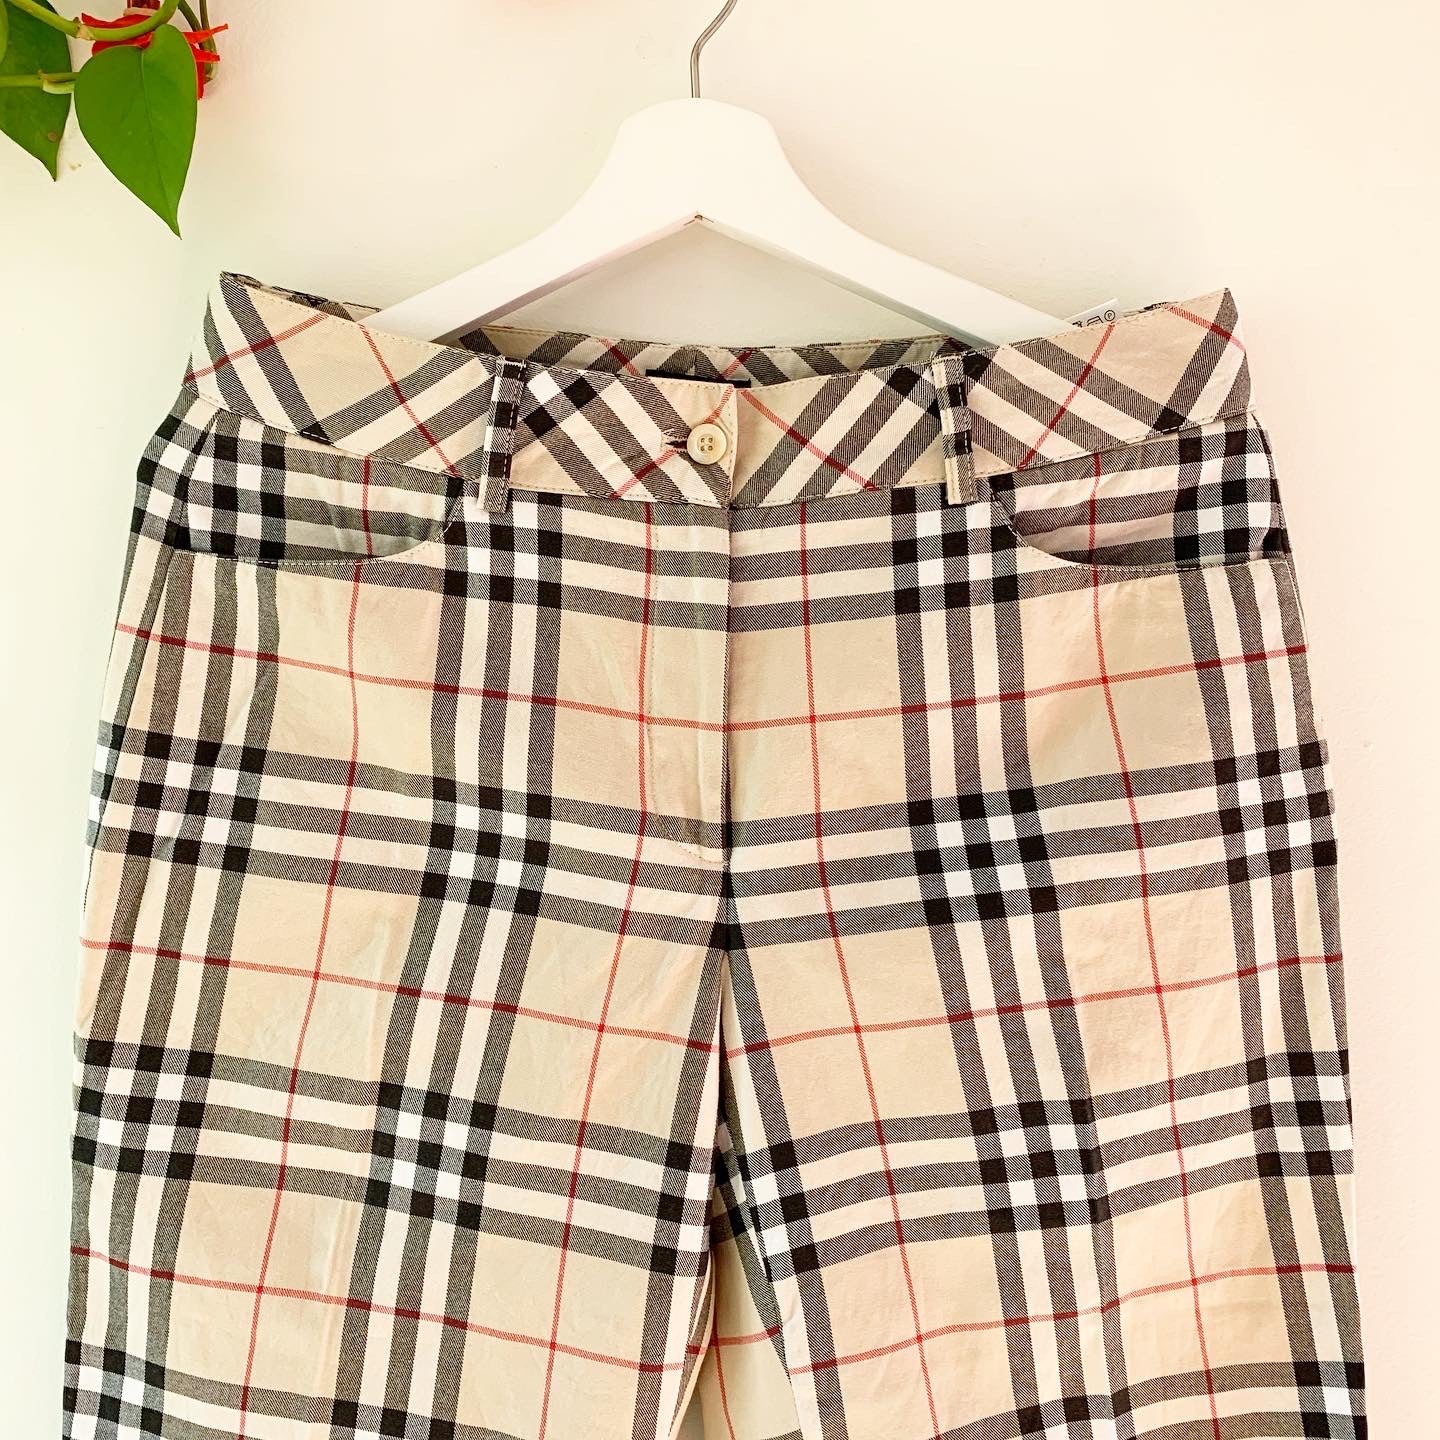 Burberry Plaid Cropped Golf Pants, Size 8